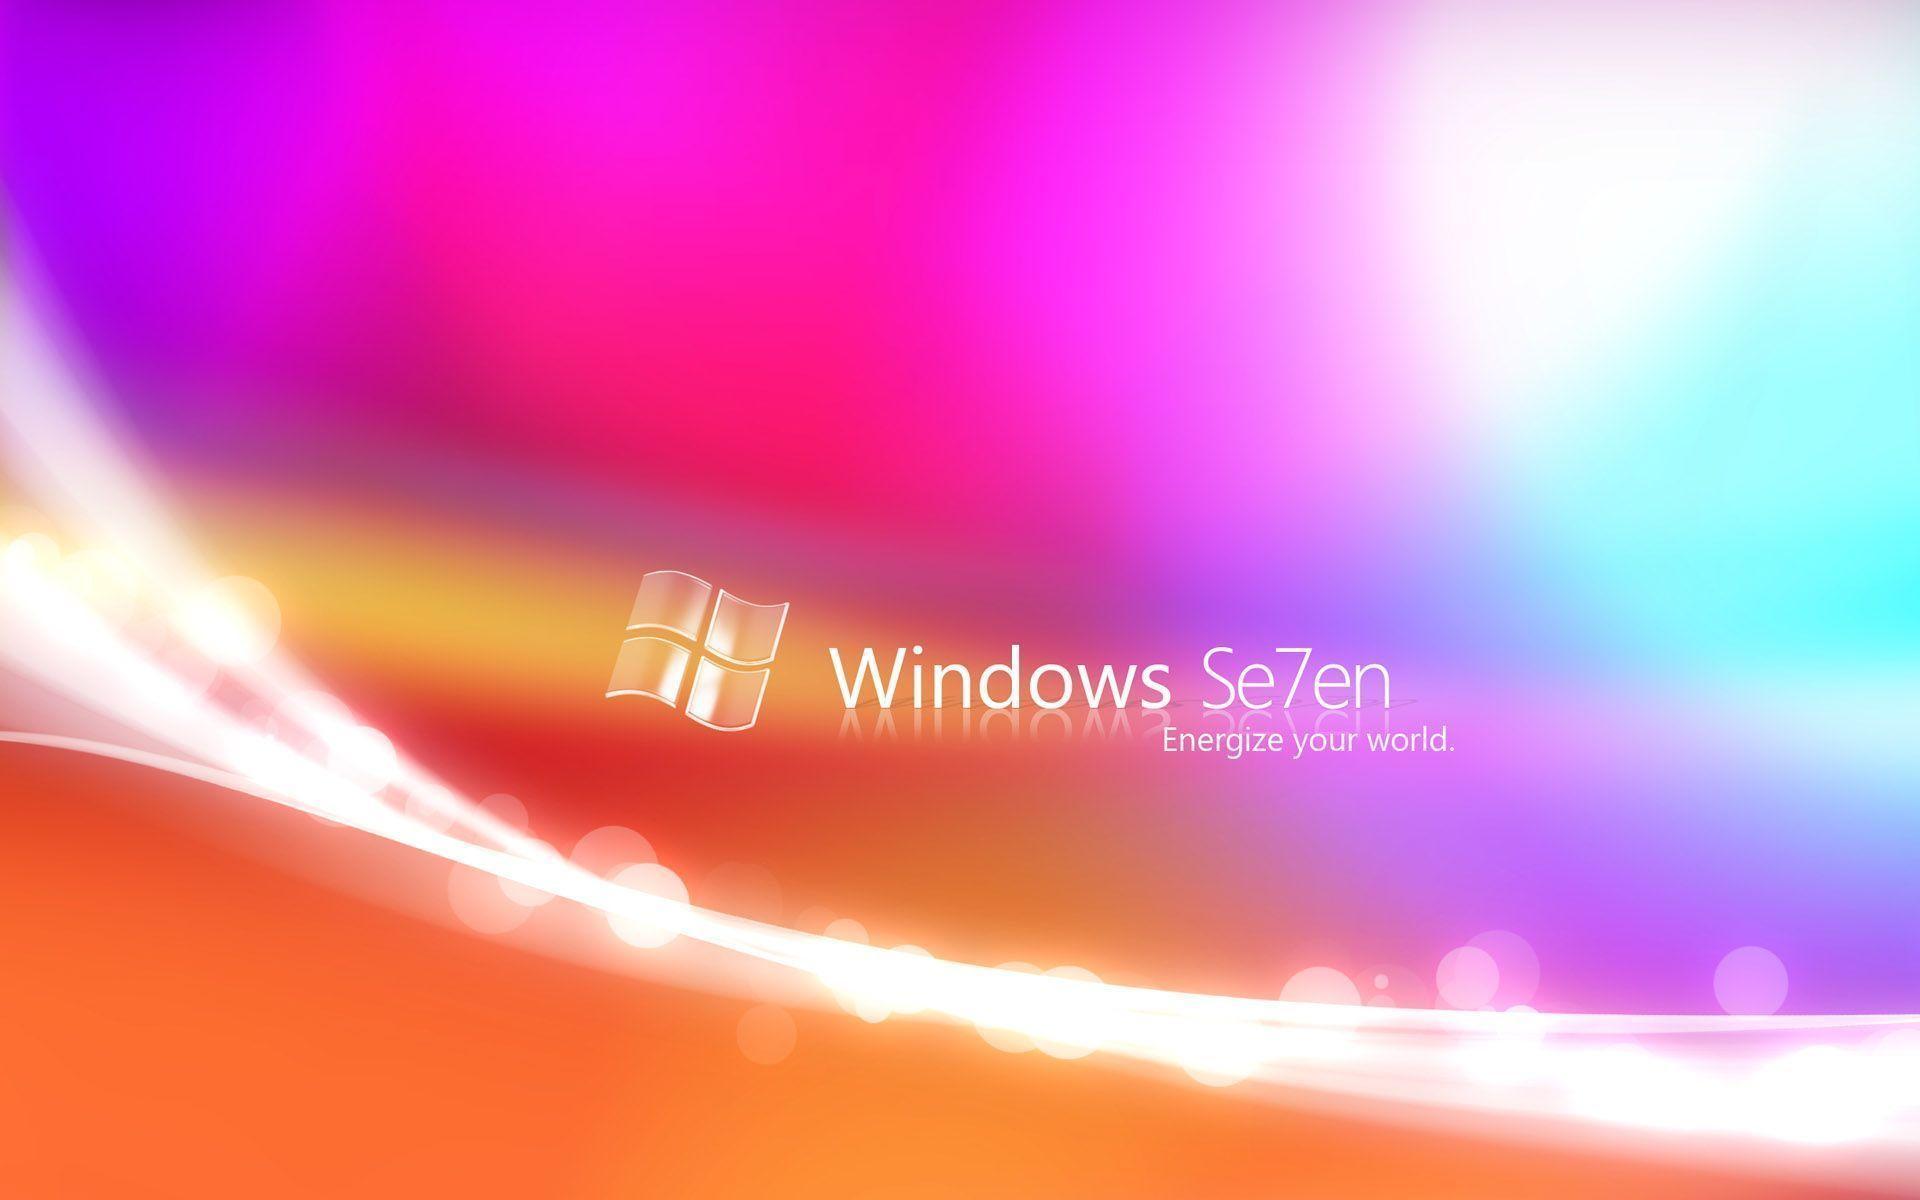 Spectacular HQ Windows 7 Wallpaper to Spice Up Your Desktop